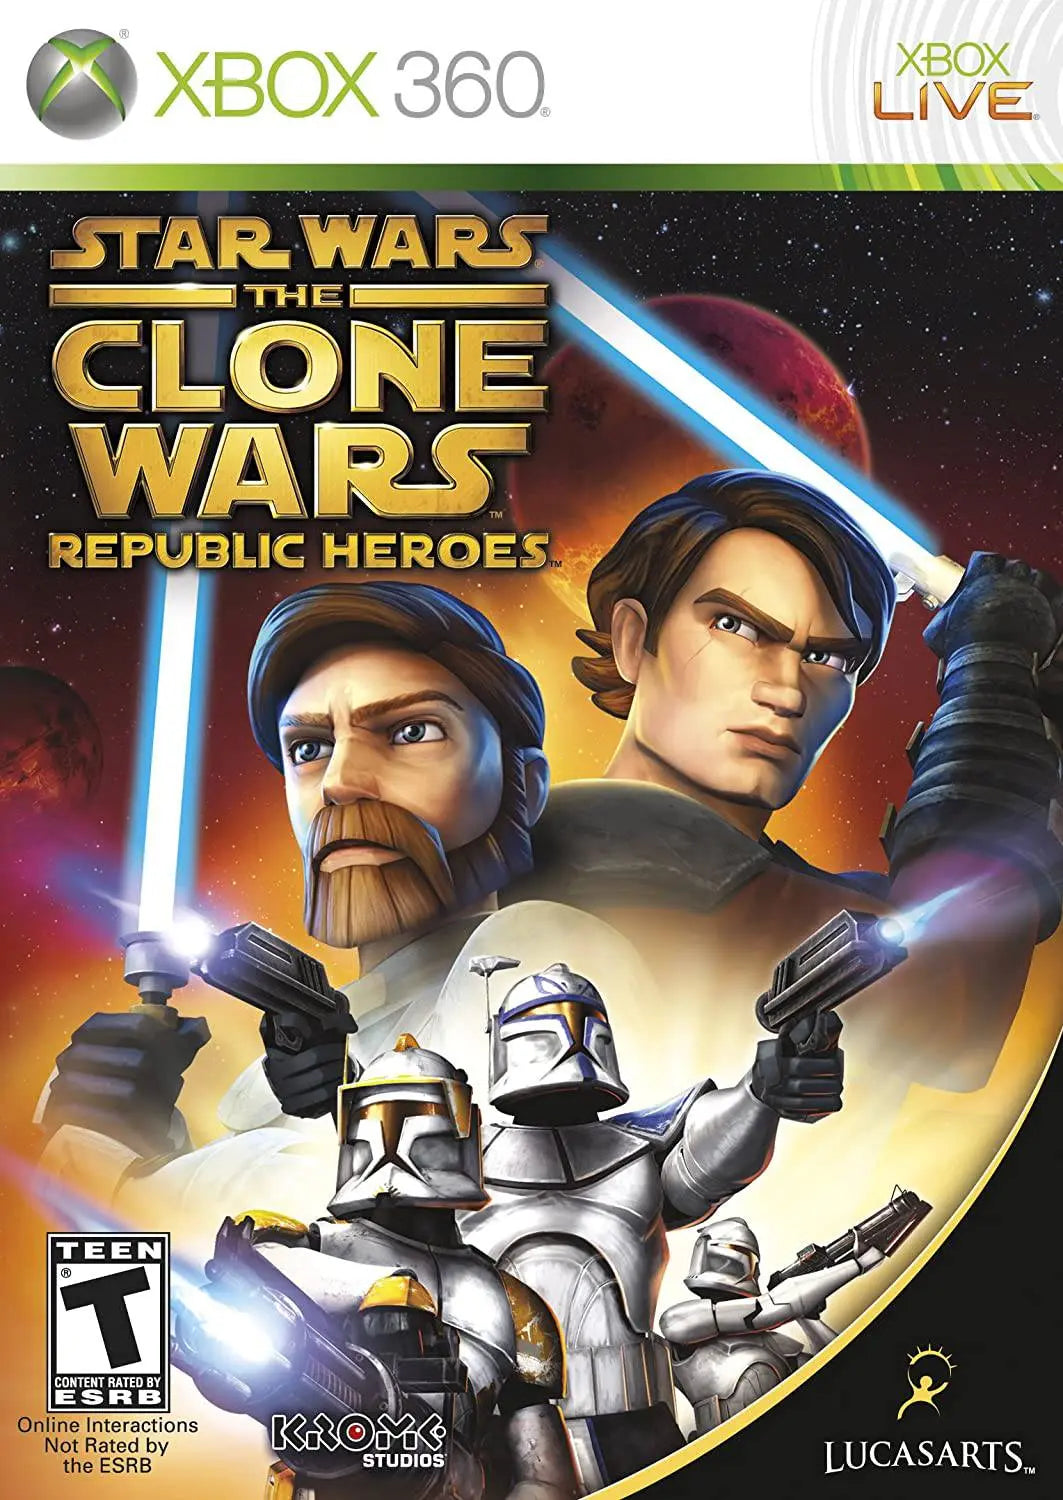 Star Wars the Clone Wars: Republic Heroes Xbox 360 - USED COPY King Gaming